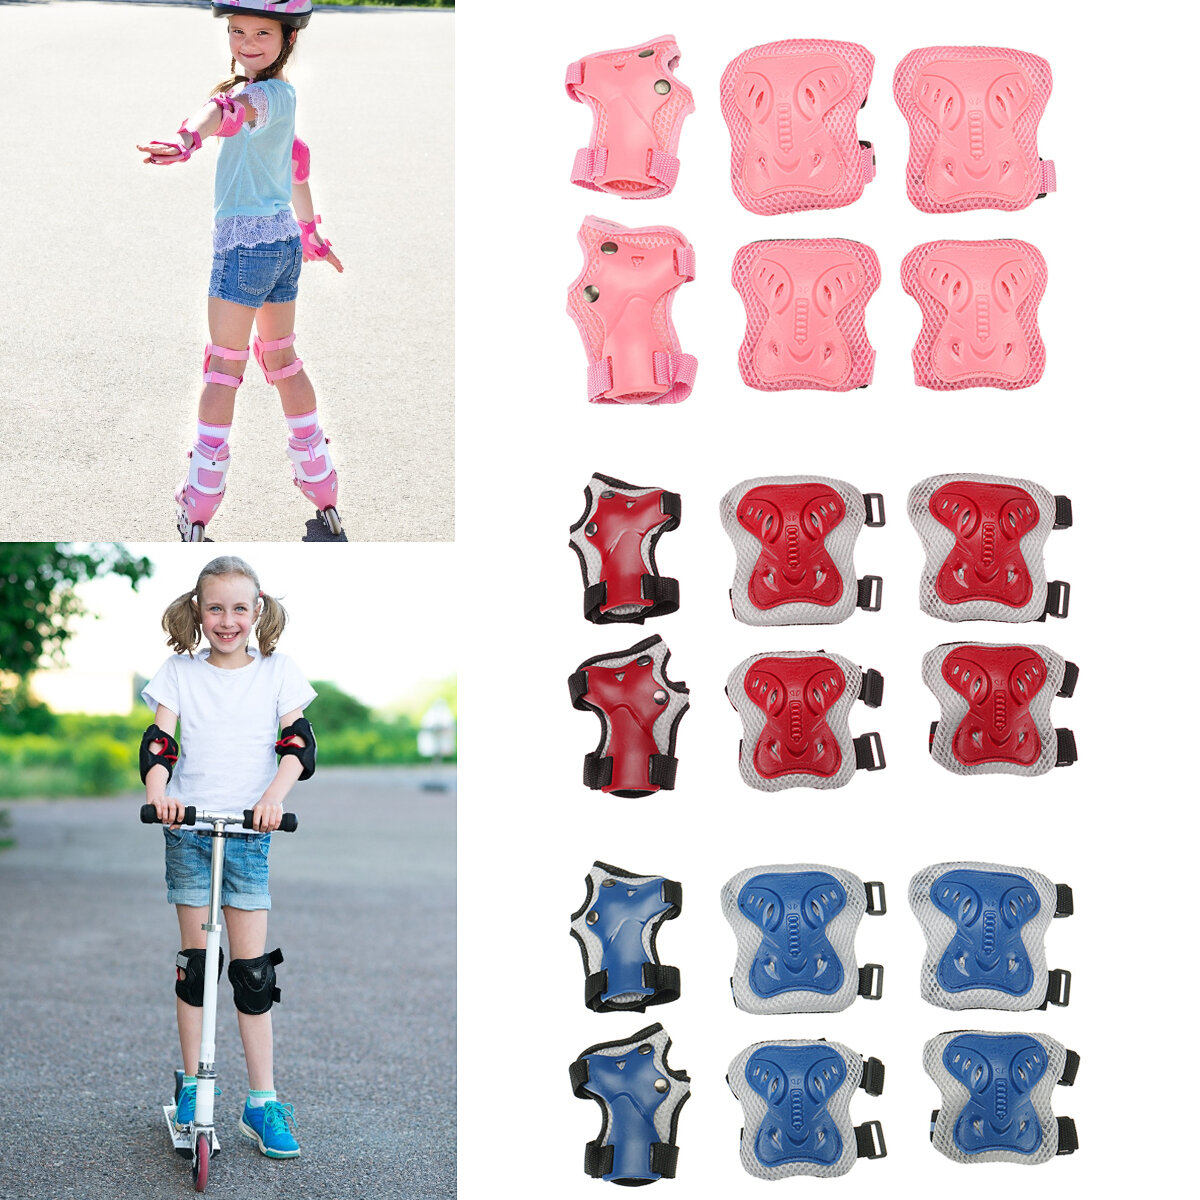 

6PCS/ Set Adult Children Knee/Elbow/Wrist Pads Protective Gears for Skateboard Bicycle Ice Inline Roller Skate Protector